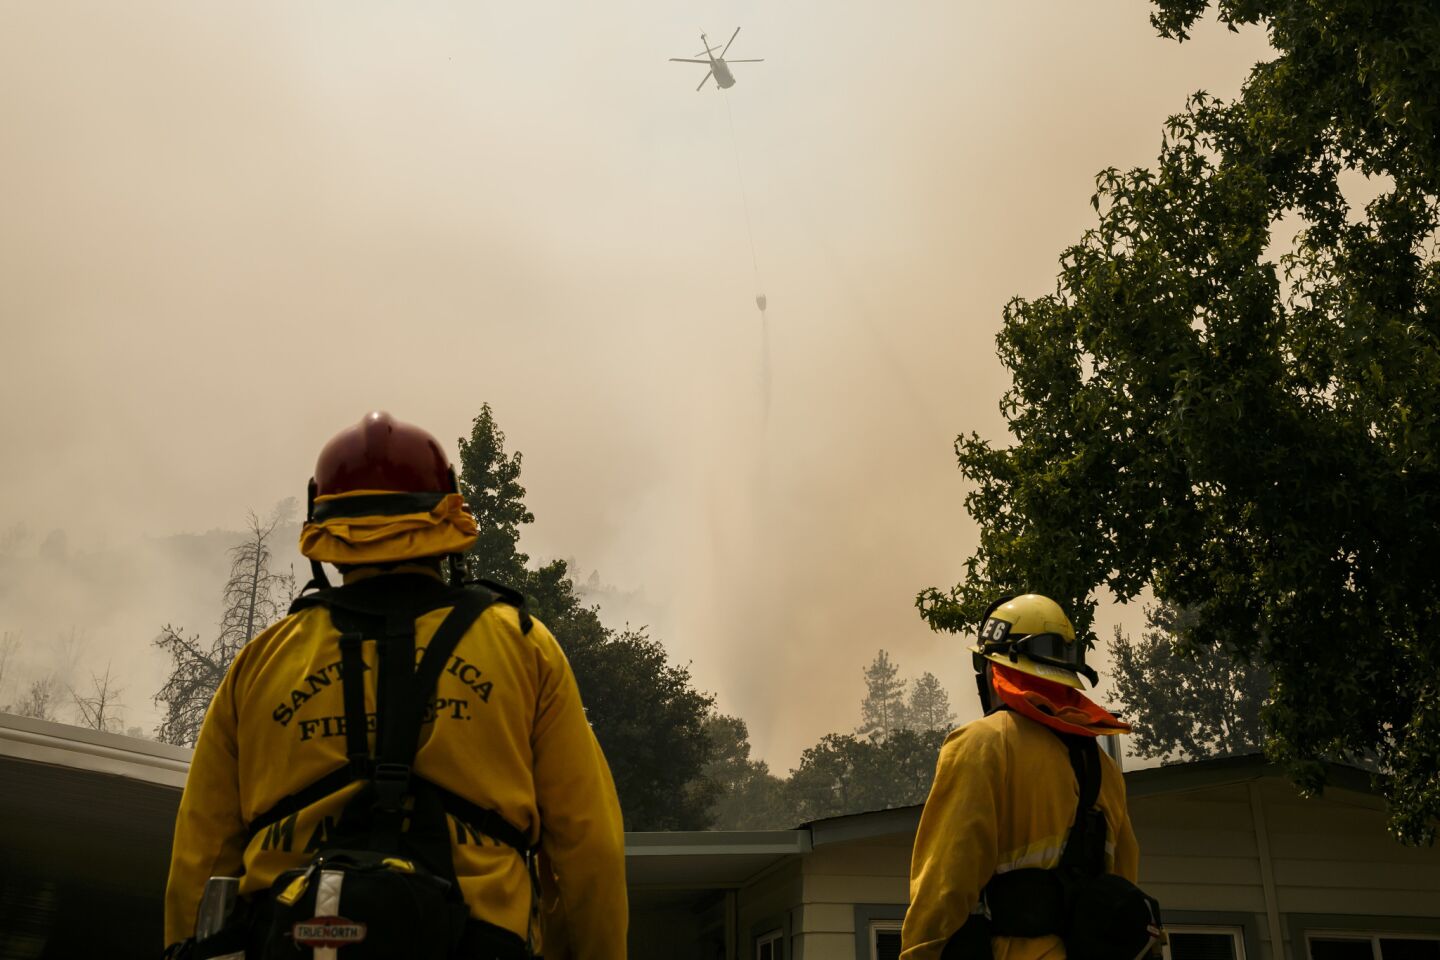 Helicopters attack the flames in the hills behind the Idle Wheels Senior Mobile Home in Mariposa, Calif.